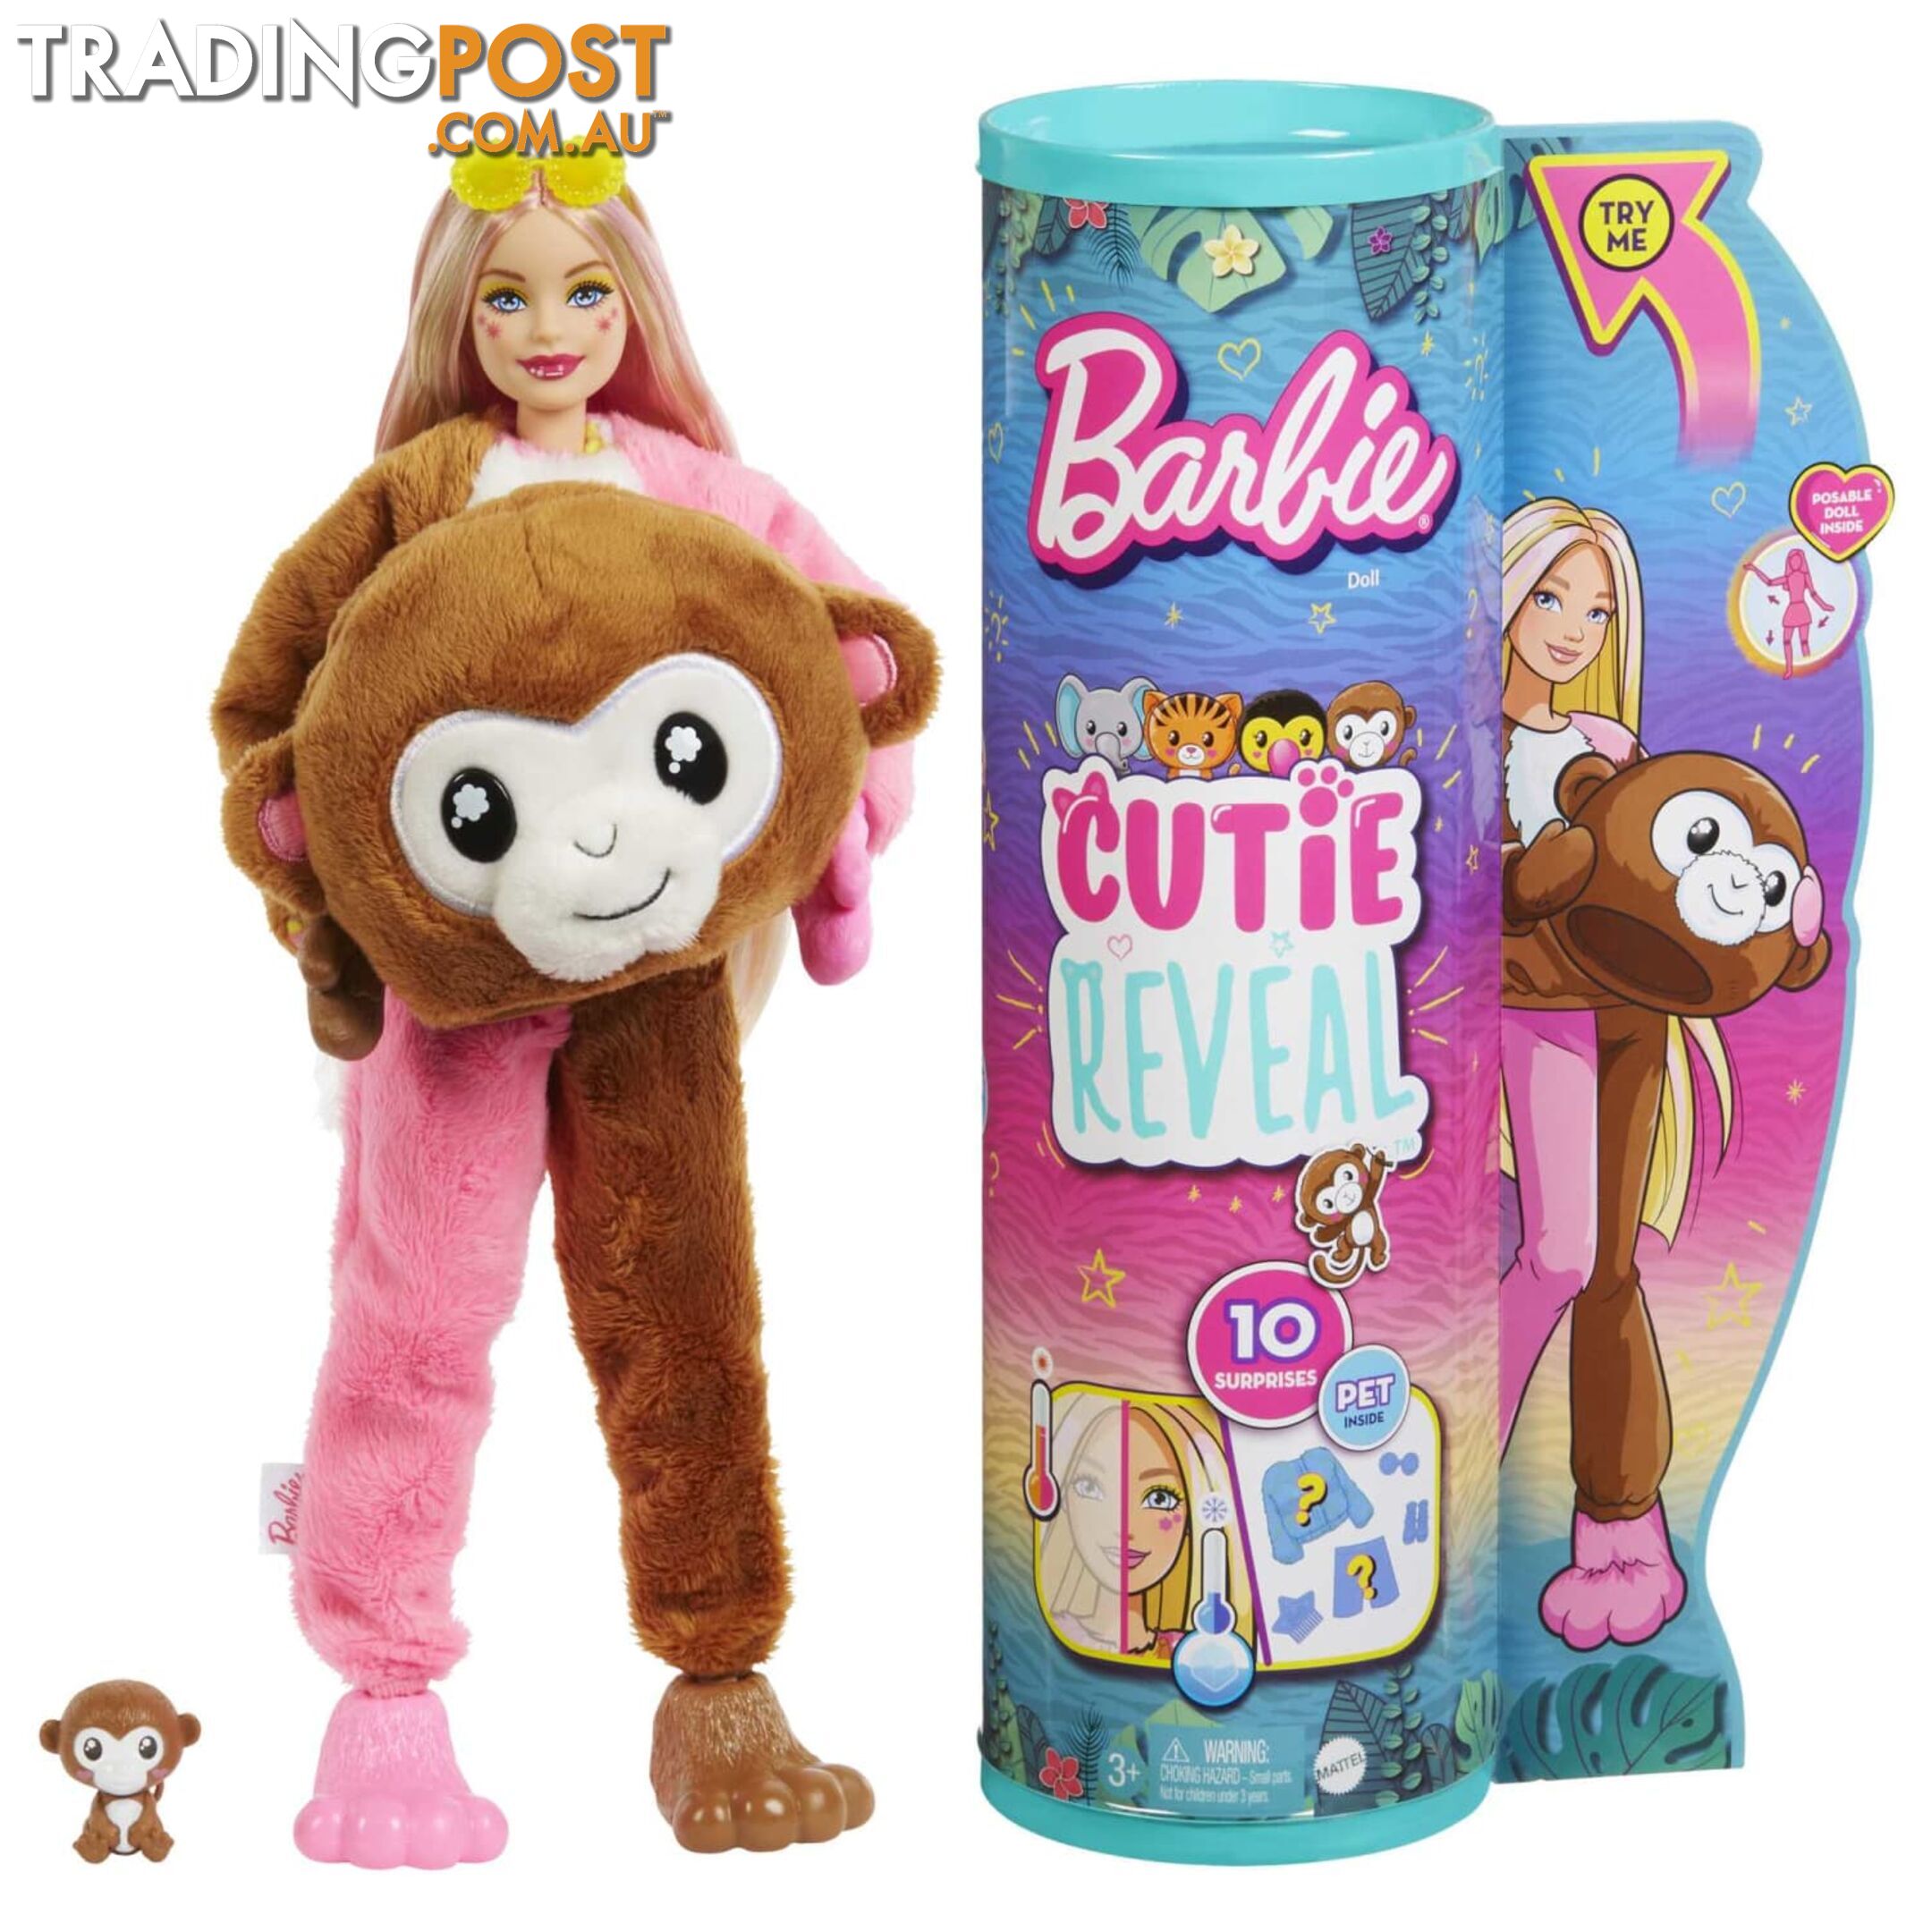 Barbie Cutie Reveal Chelsea Doll And Accessories Jungle Series Monkey-themed Small Doll Set- Mahkr01 - 194735106646